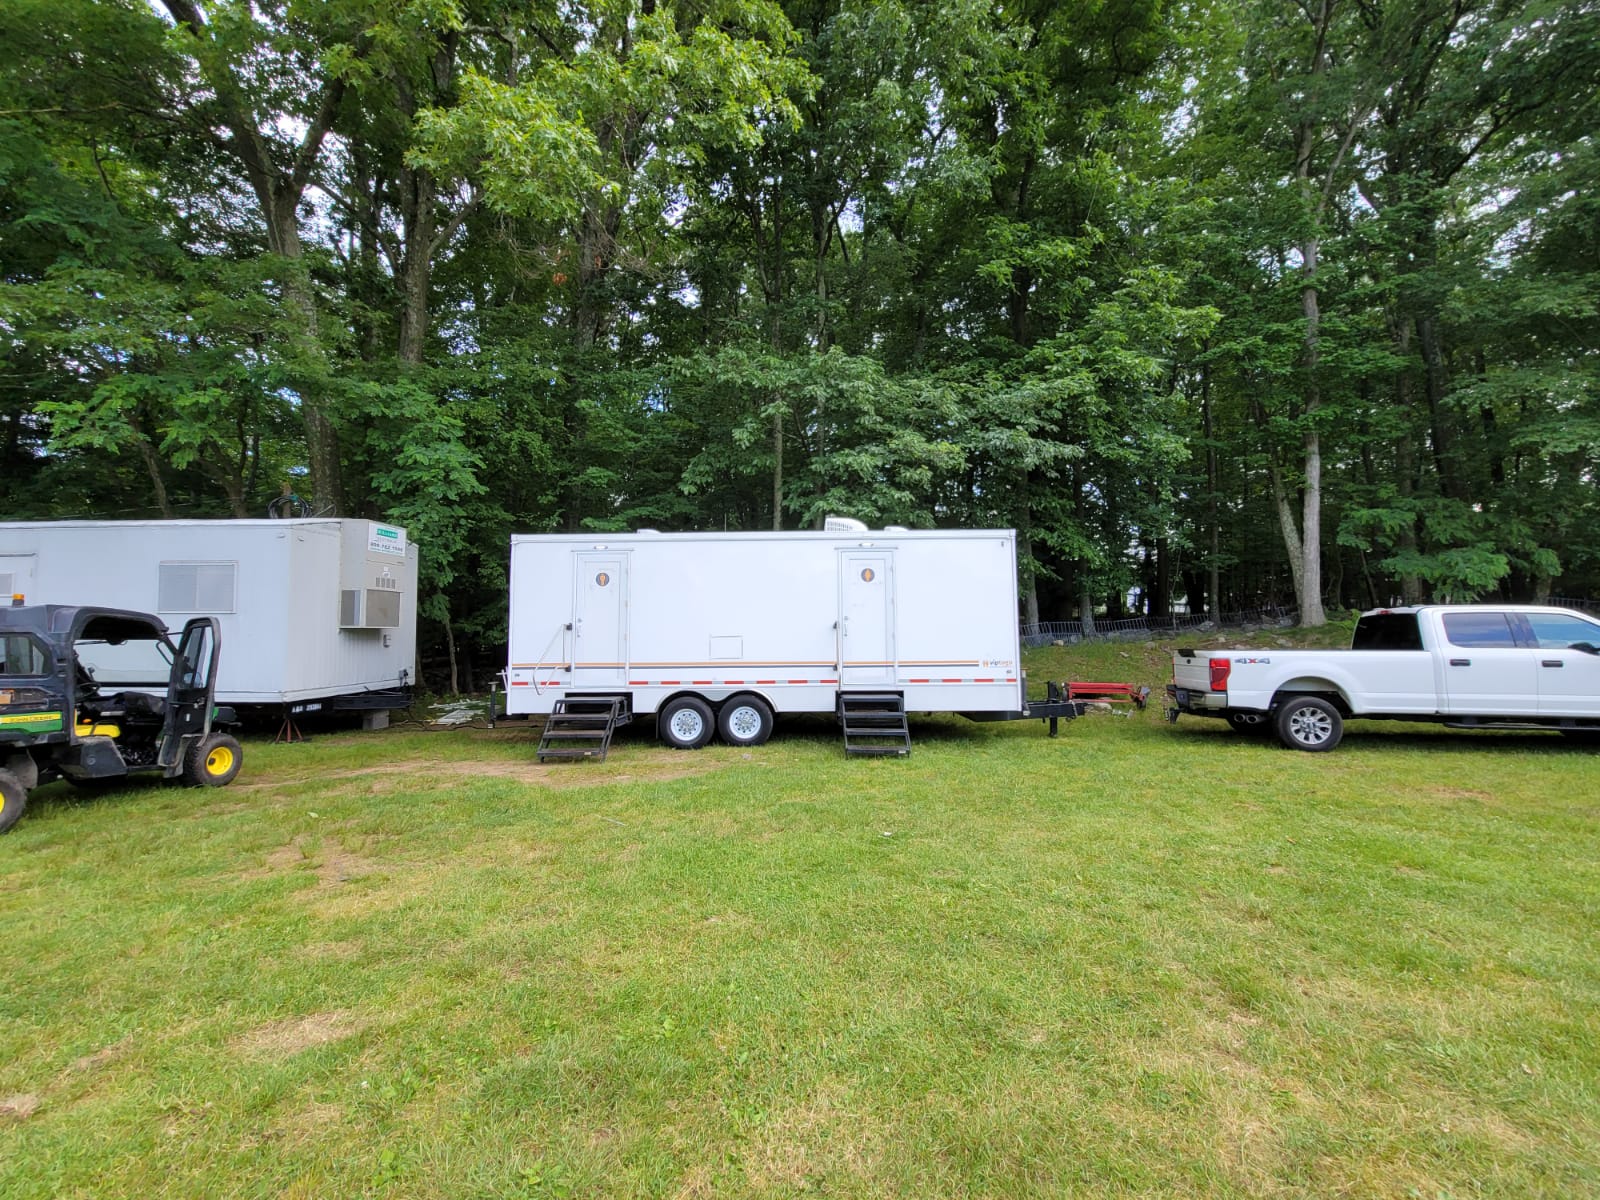 portable restroom trailers on grass